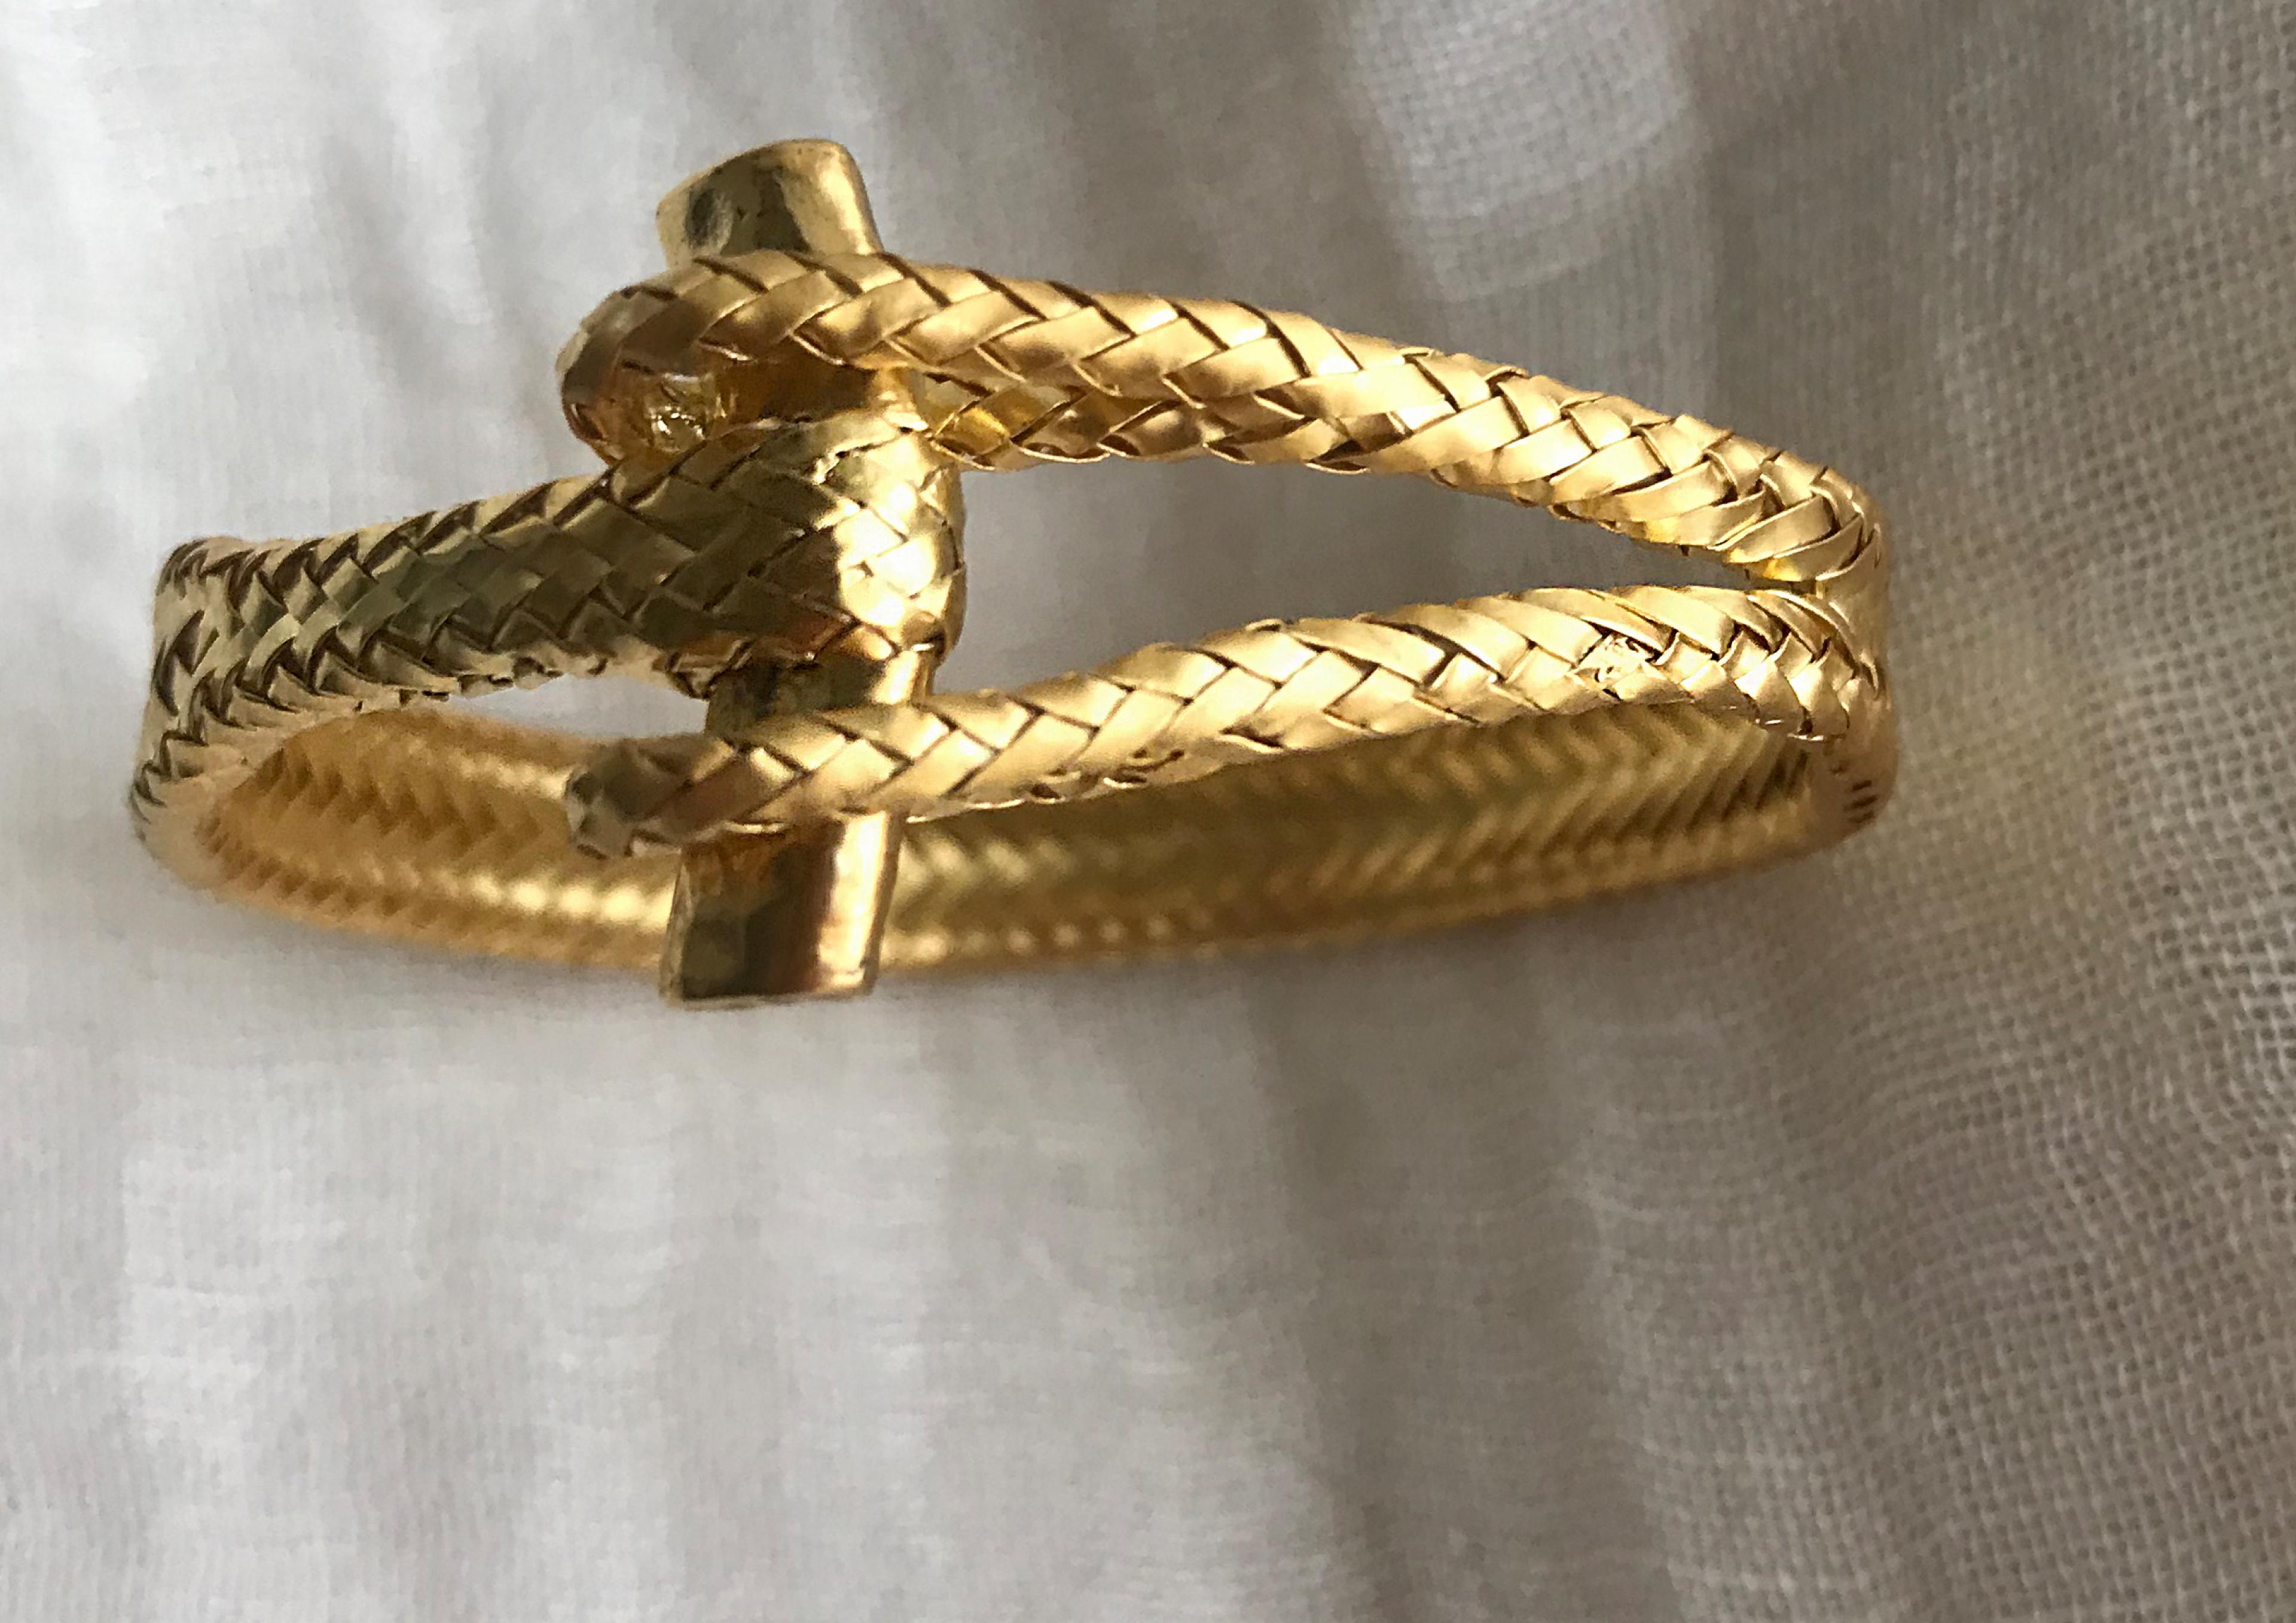 a gold bracelet with woven gold thread resembling hemp but actually made of metal